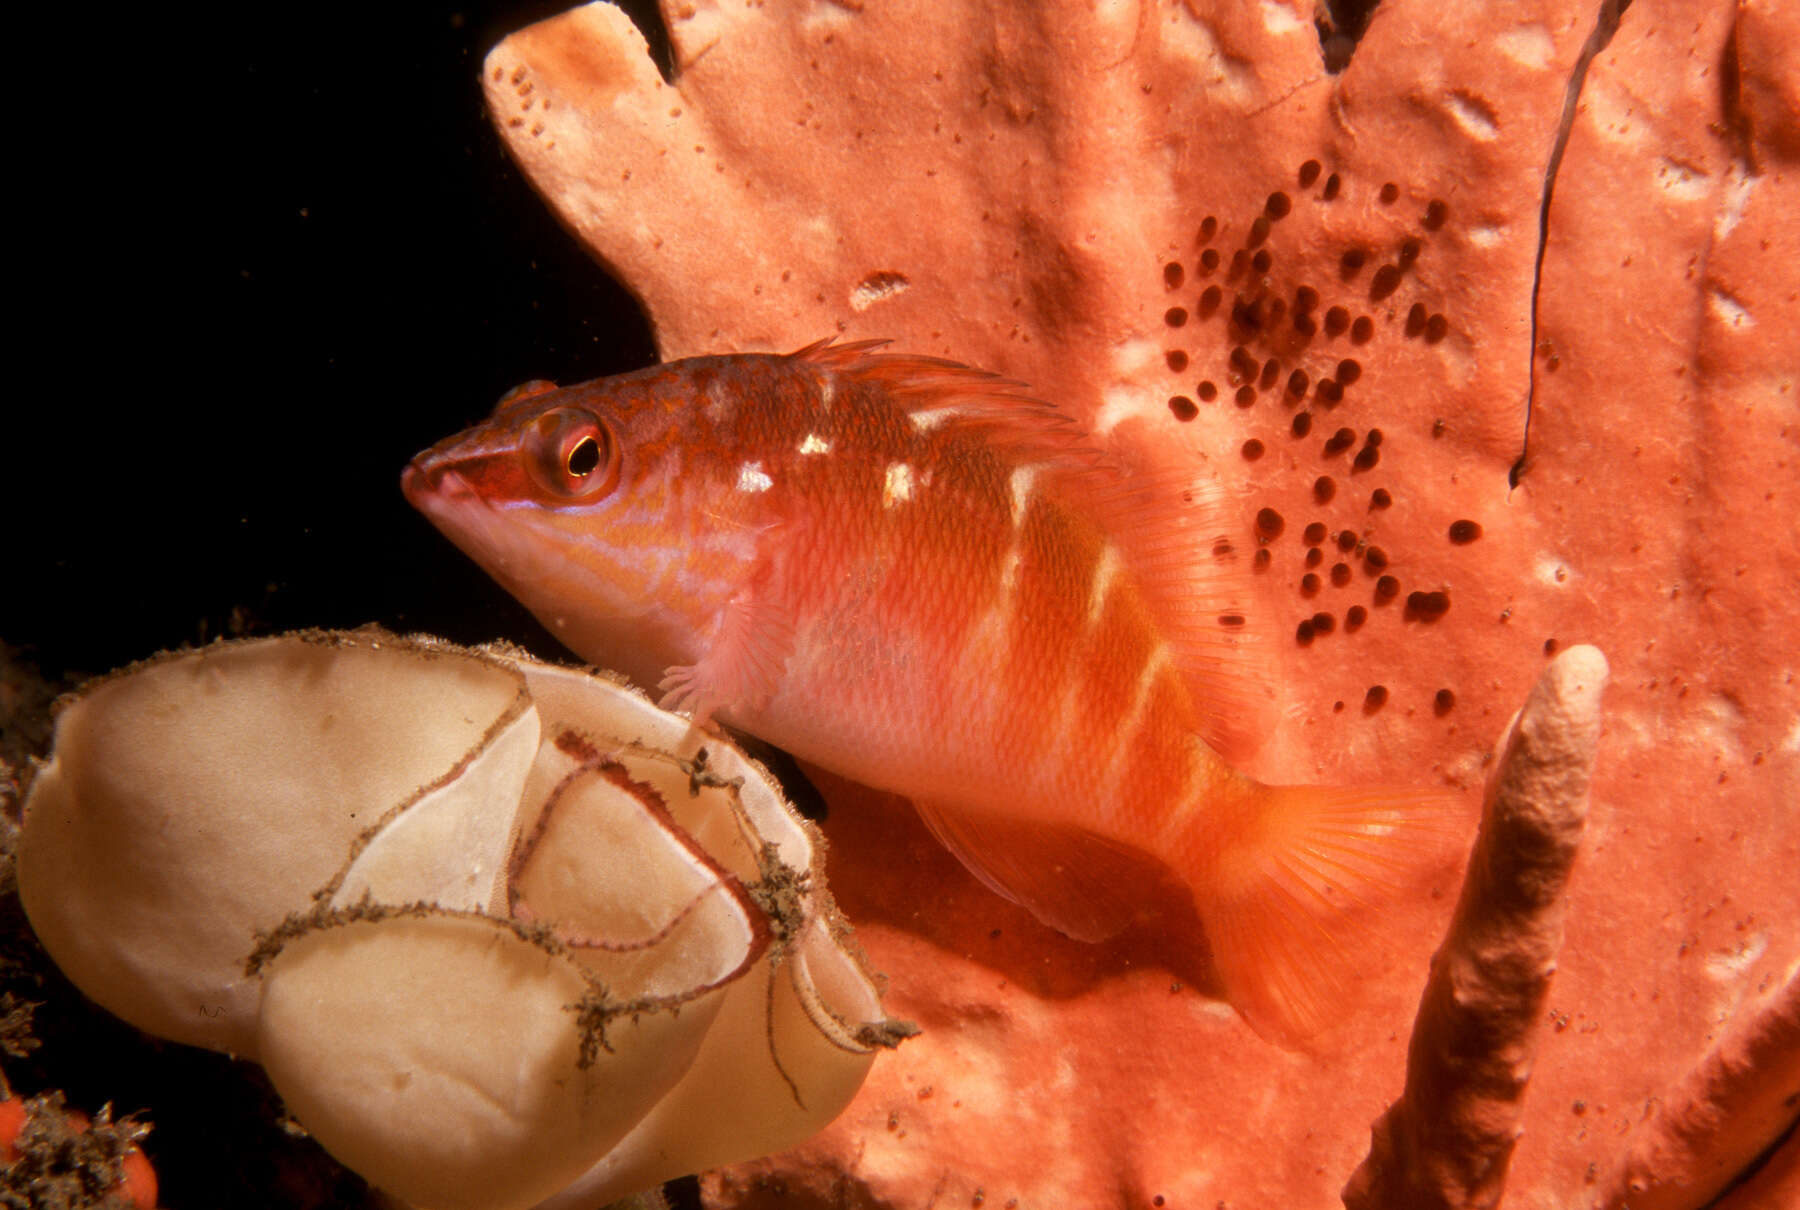 Image of Half-banded seaperch